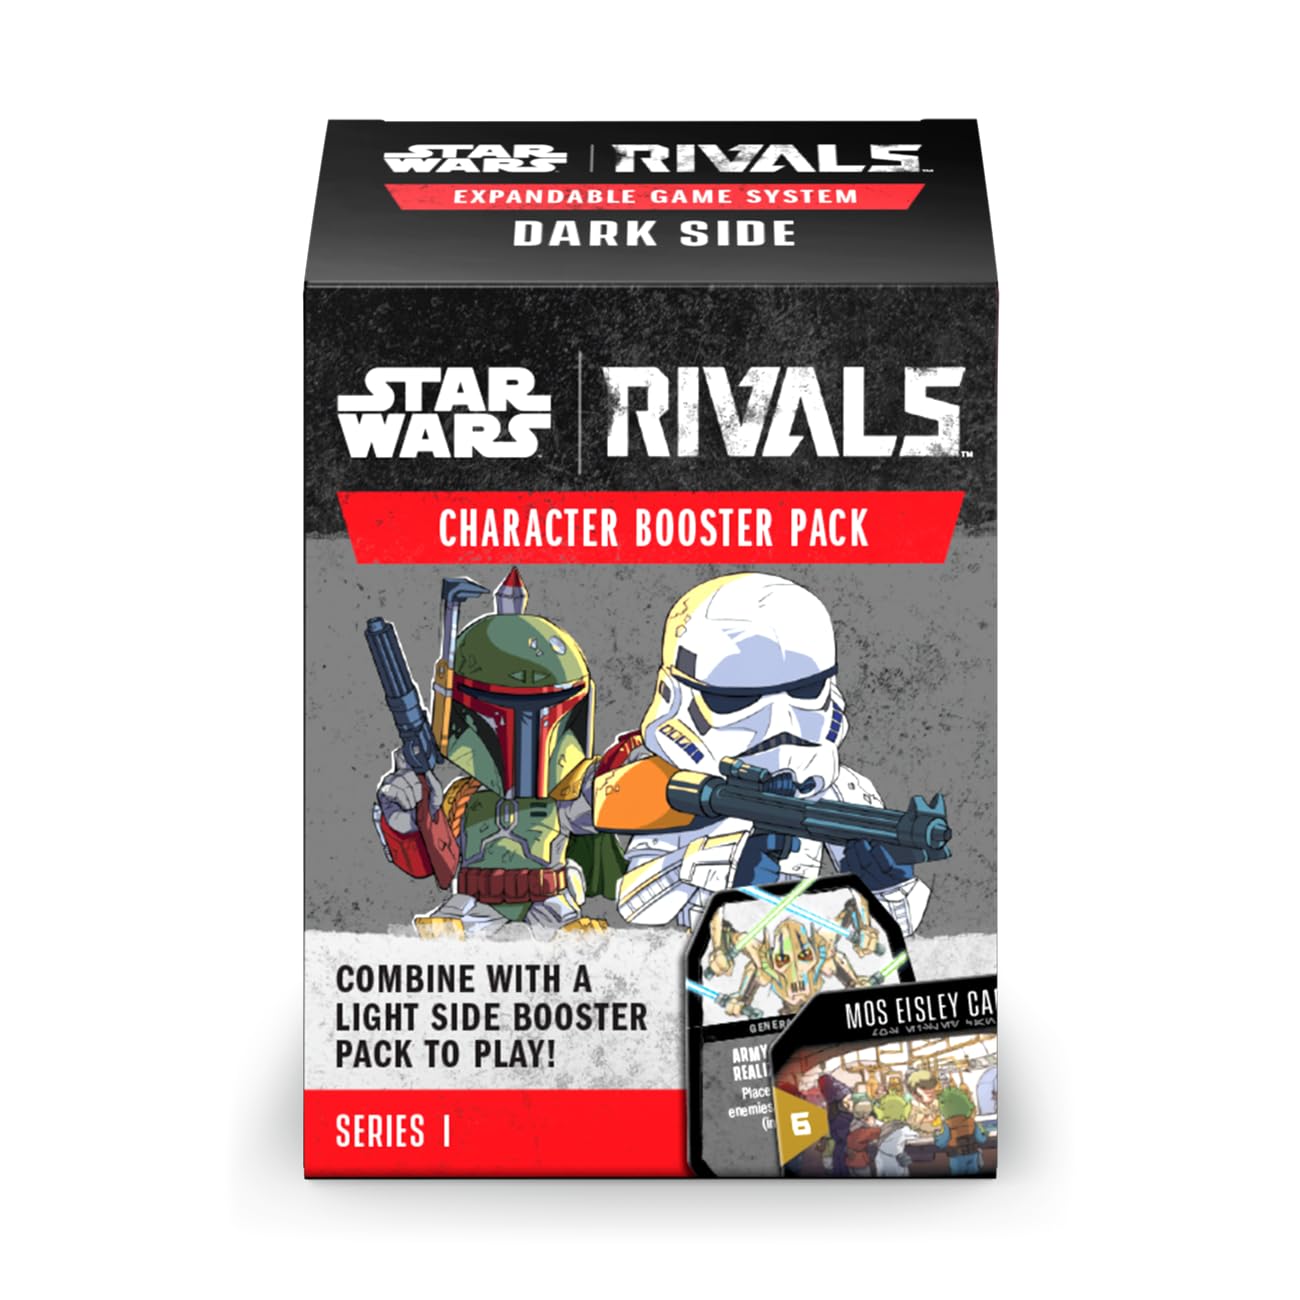 Funko Star Wars Rivals Expandable Game System for 2 Players Ages 7 and Up - Dark Side Character Pack - Series 1